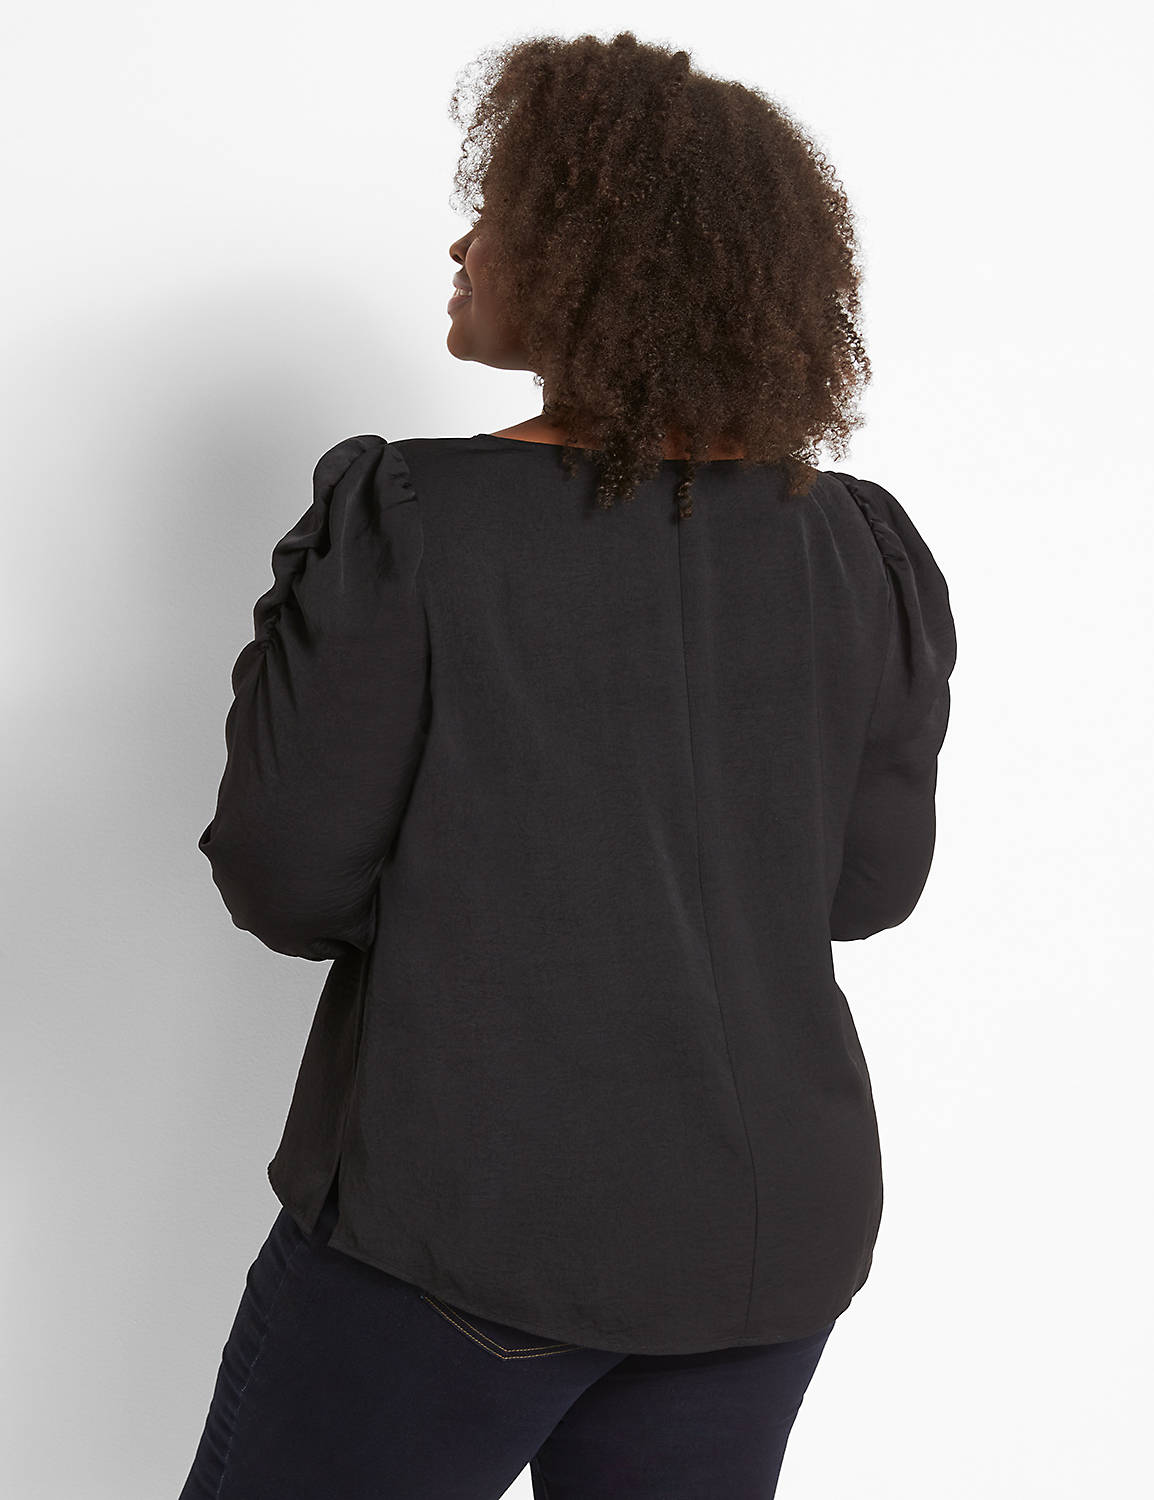 Puff-Sleeve Blouse Product Image 2